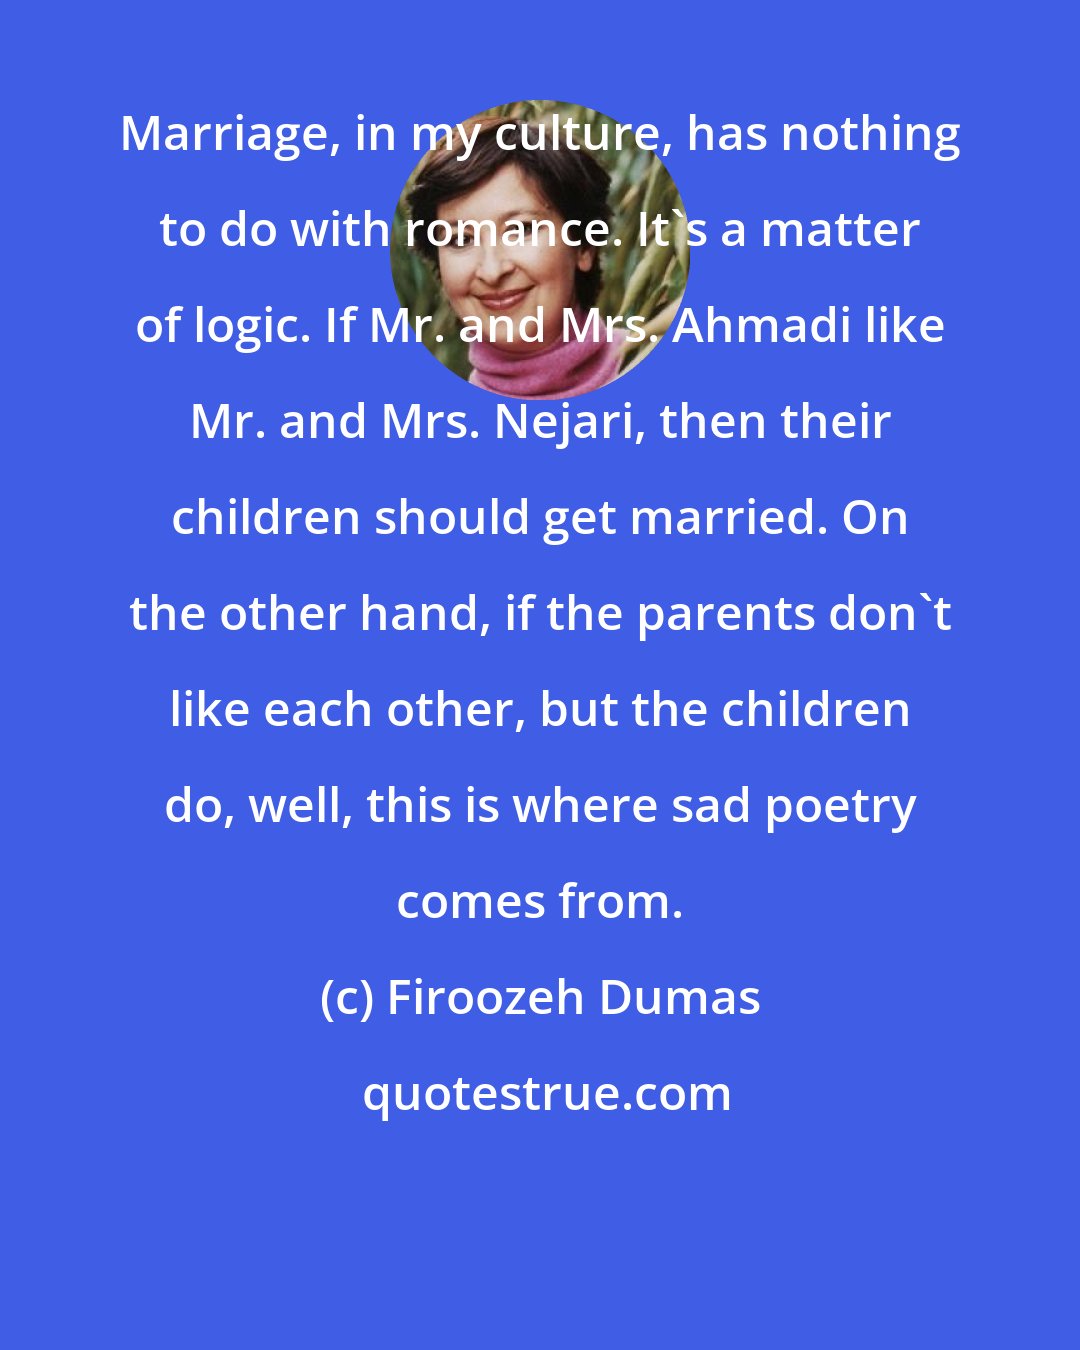 Firoozeh Dumas: Marriage, in my culture, has nothing to do with romance. It's a matter of logic. If Mr. and Mrs. Ahmadi like Mr. and Mrs. Nejari, then their children should get married. On the other hand, if the parents don't like each other, but the children do, well, this is where sad poetry comes from.